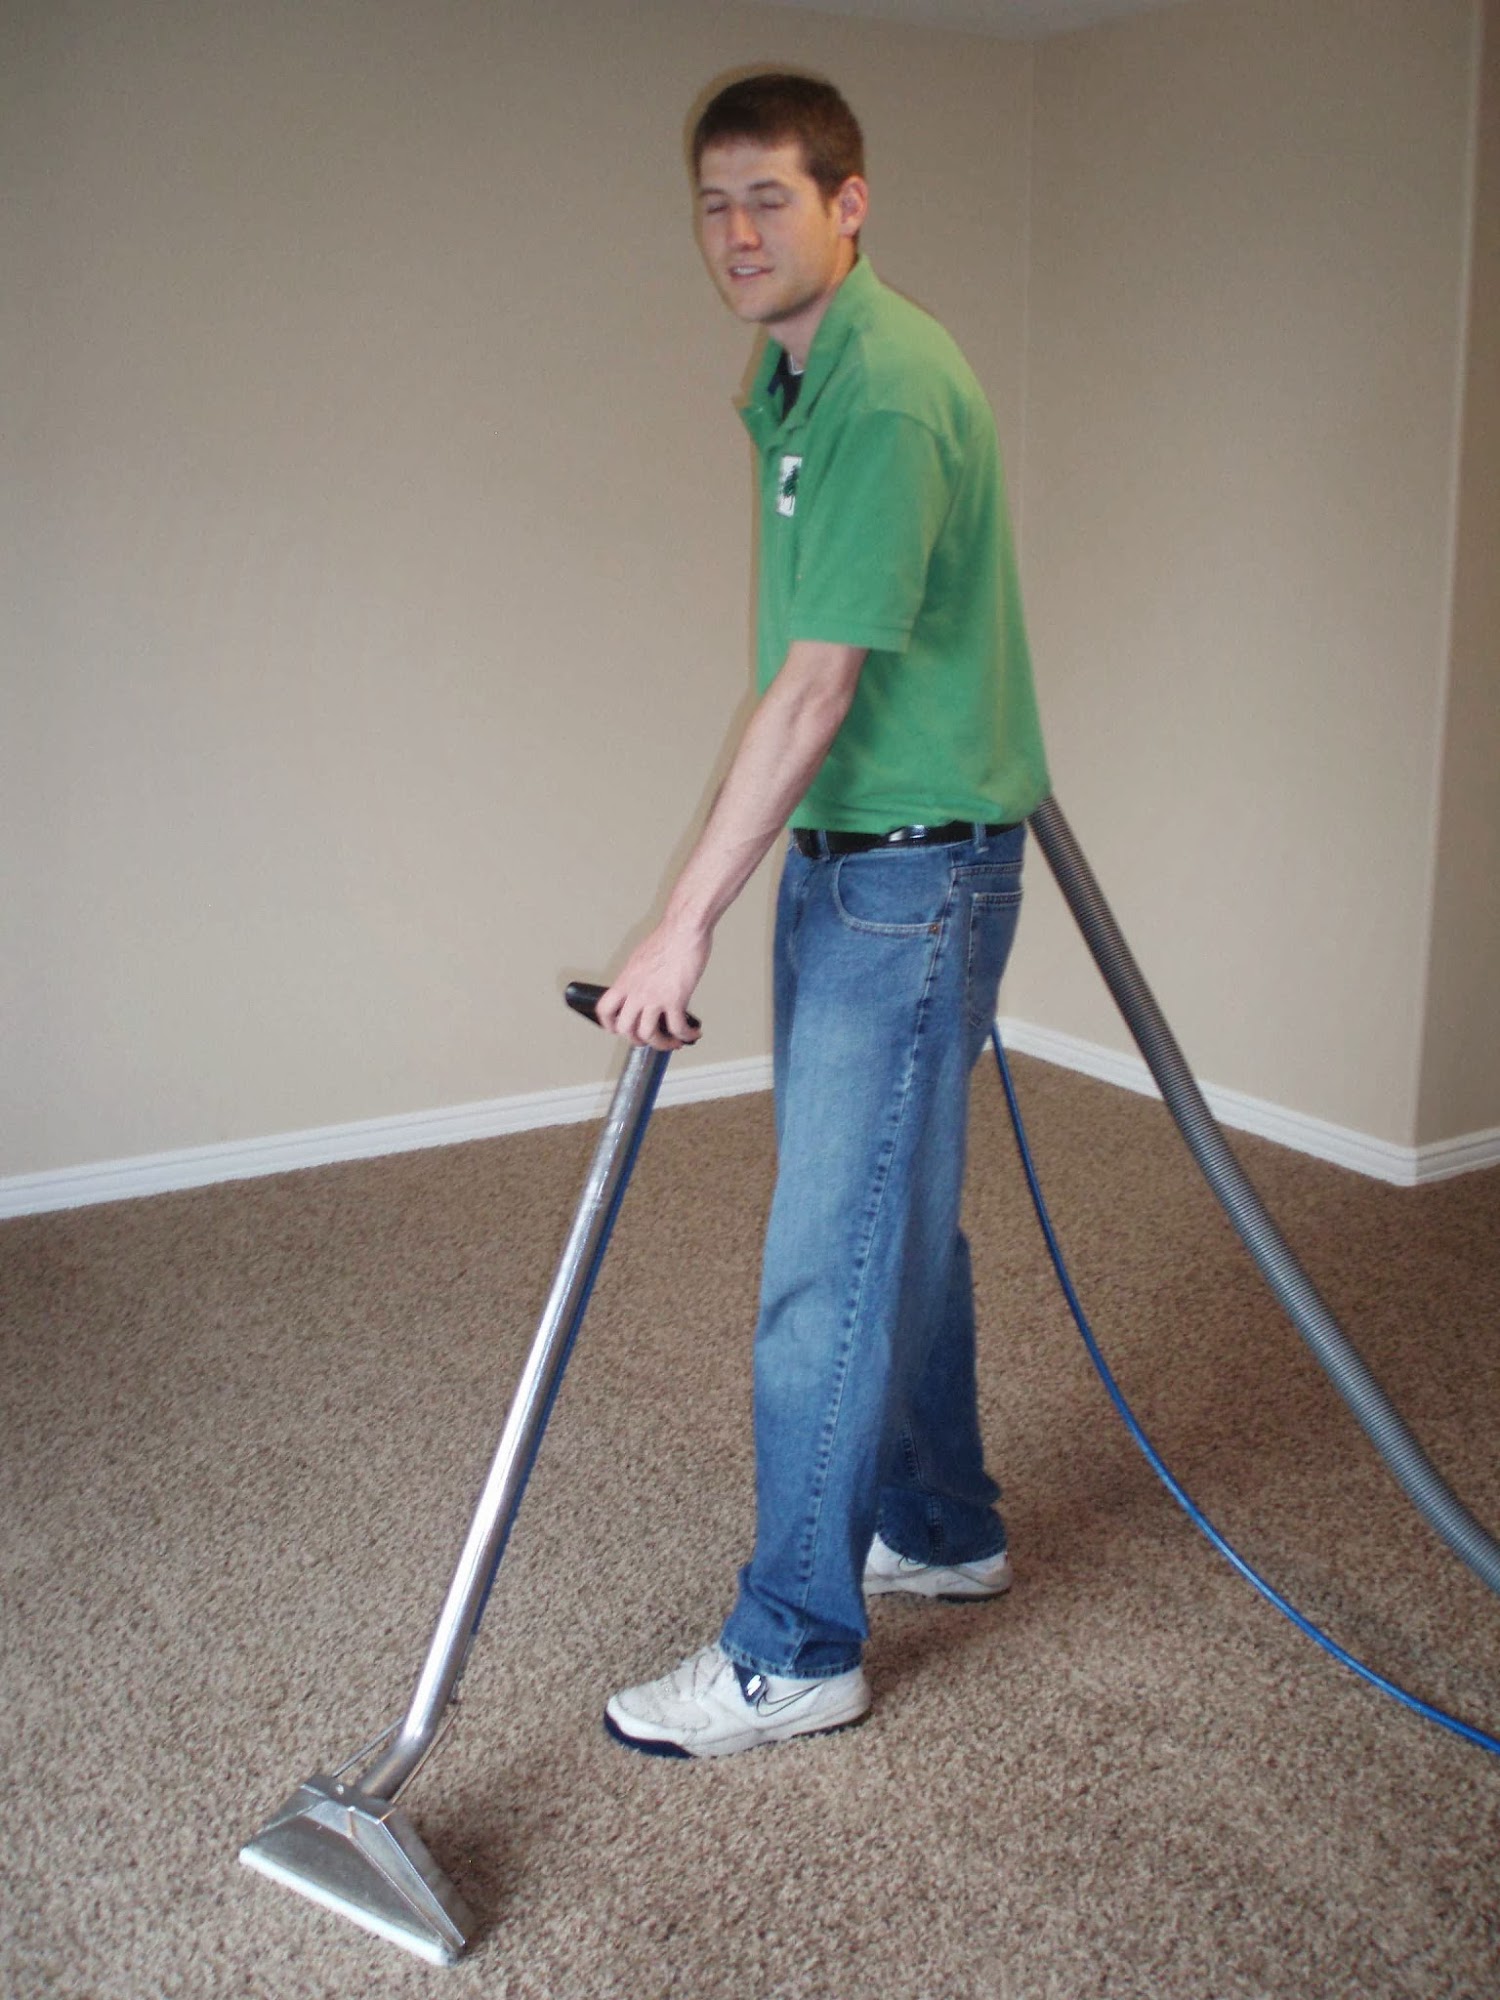 Best Price & Service Carpet Cleaning 2810 Ross Ave, Ammon Idaho 83406